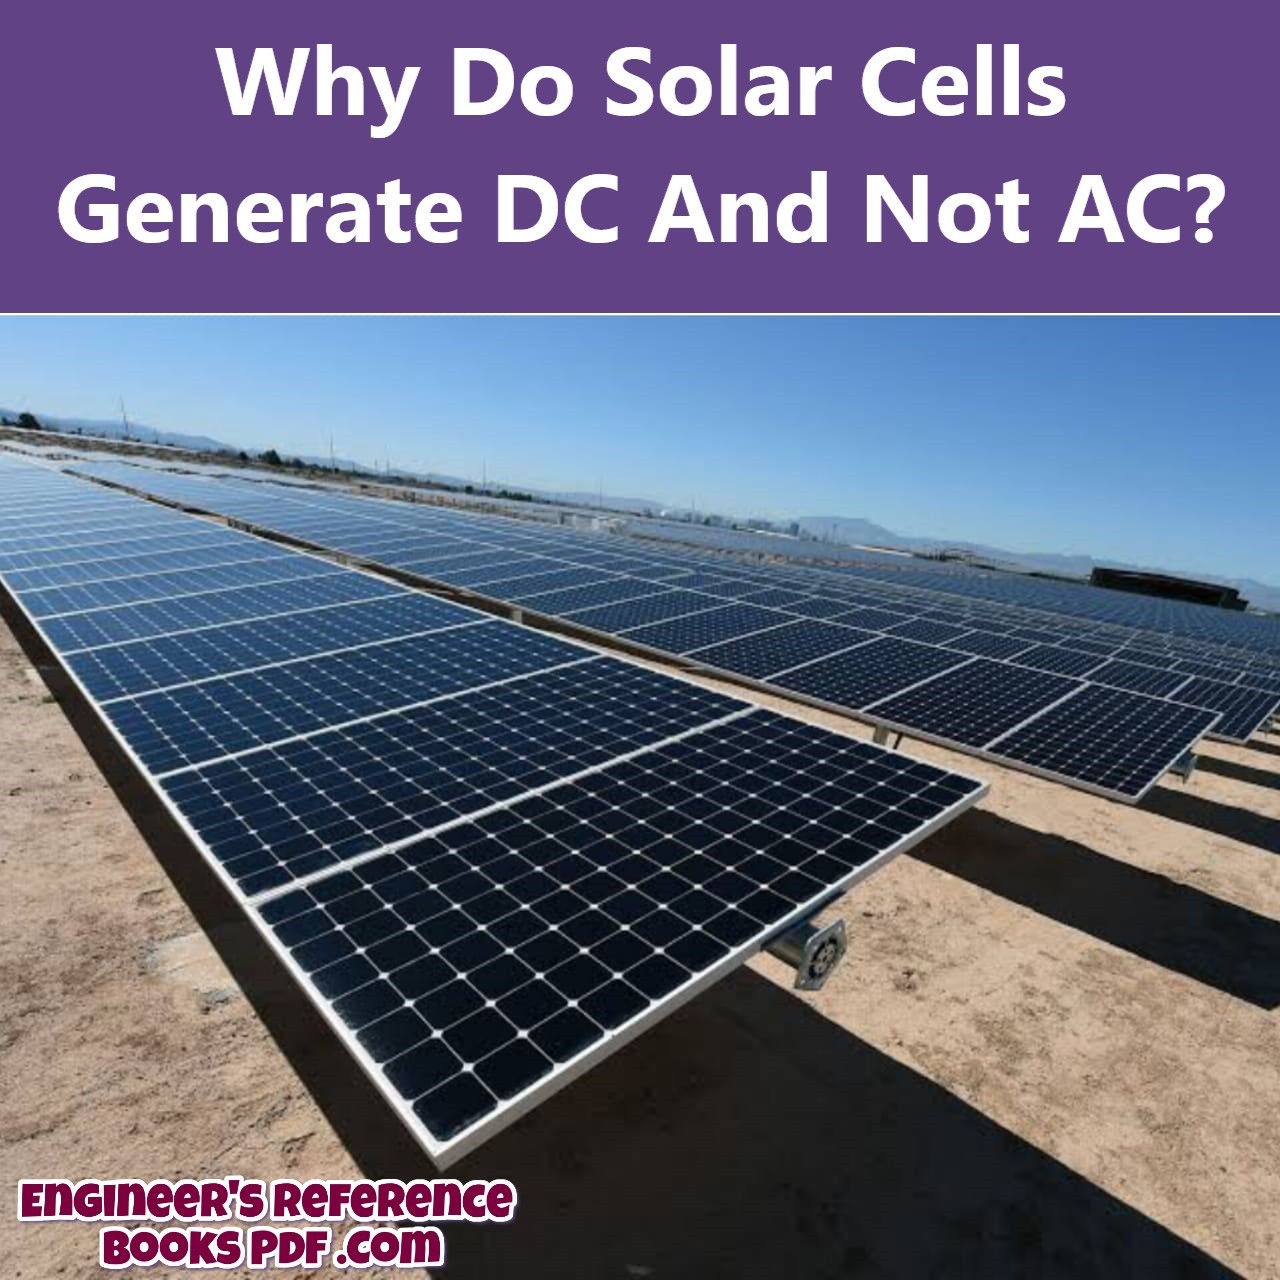 Why Do Solar Cells Generate DC And Not AC?
